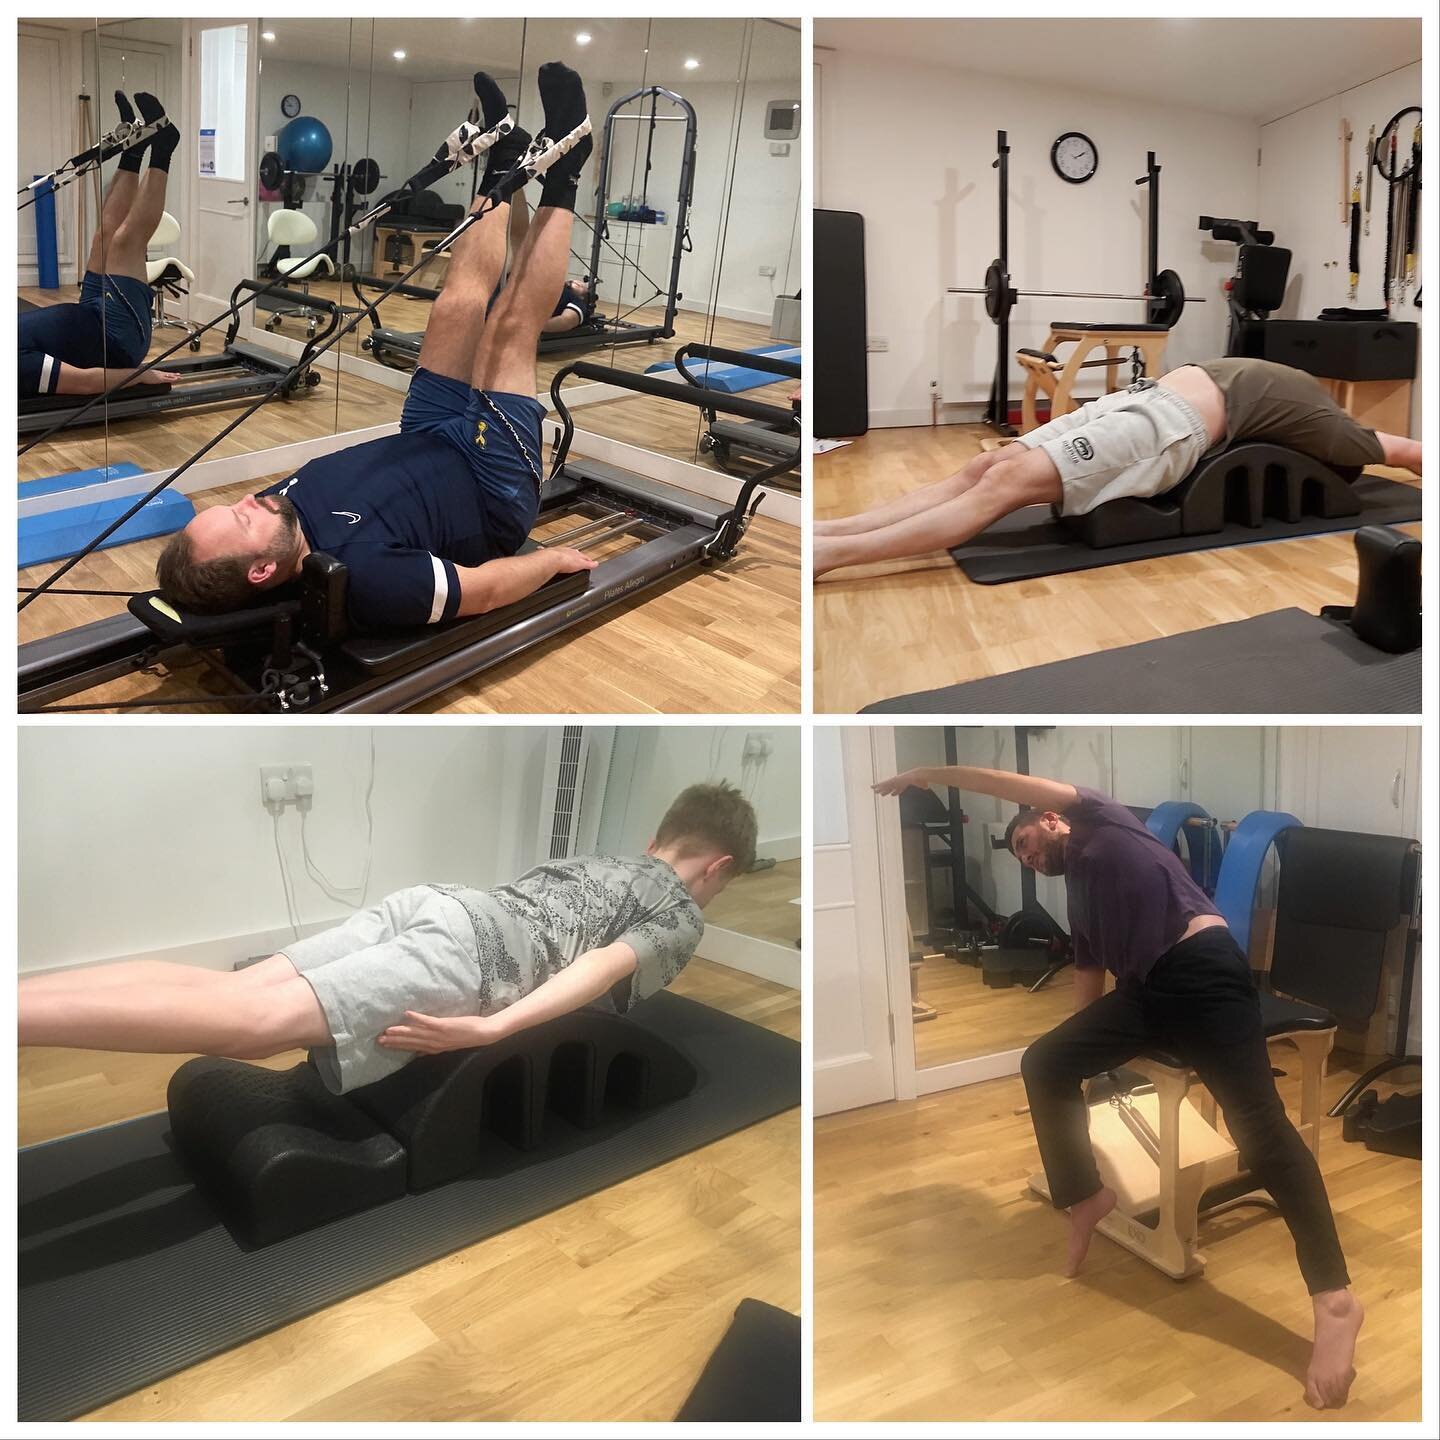 Pilates For Men

Are you suffering with:
- sore backs from sitting at a desk/in a car/looking down at your phone for long periods
- lack of mobility and flexibility hampering daily life
- old niggly sports injuries resurfacing

Or maybe you are looki